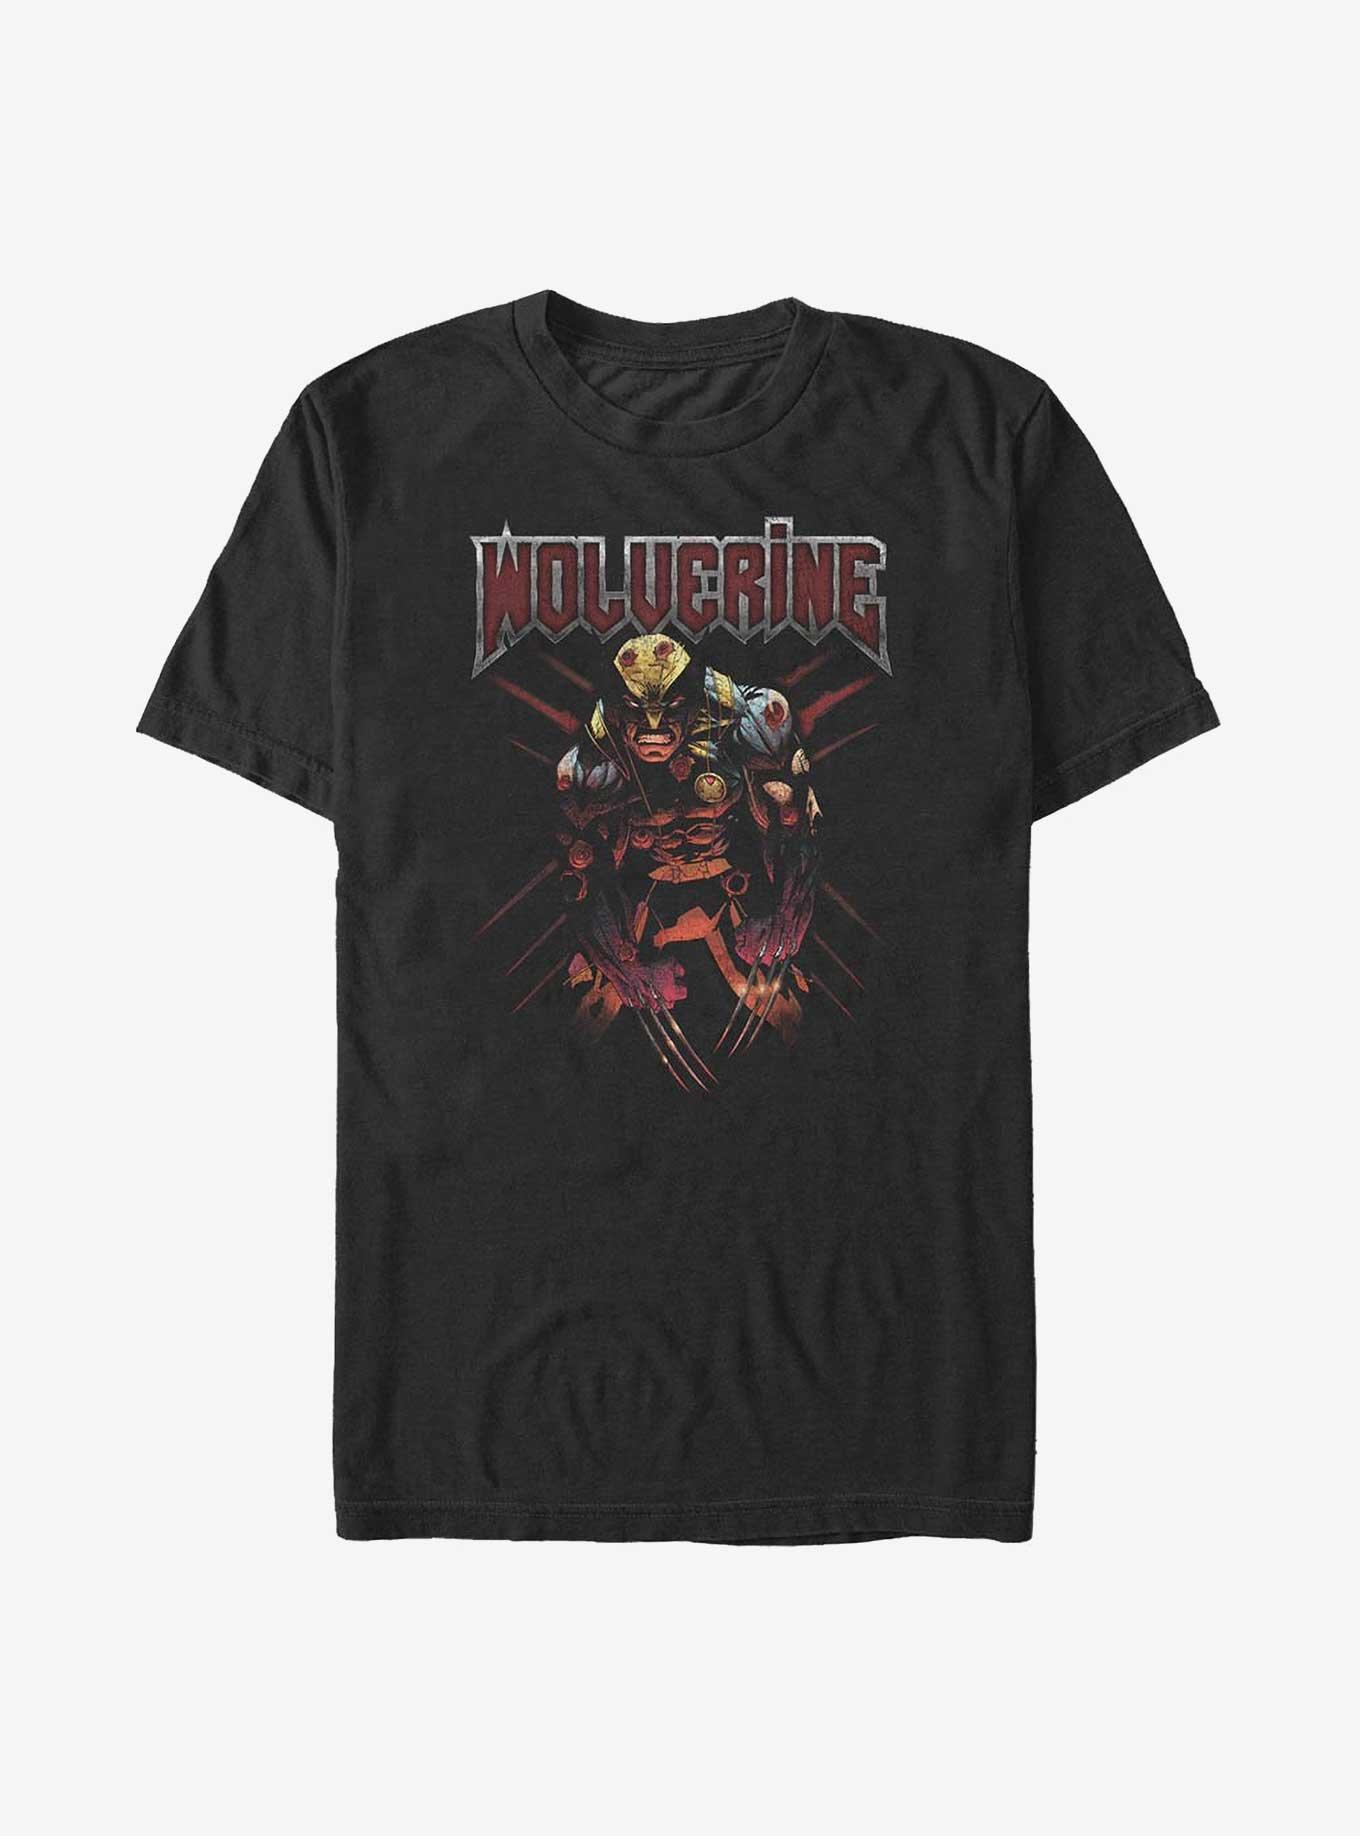 Wolverine Claws Out Unbeaten Big & Tall T-Shirt, BLACK, hi-res